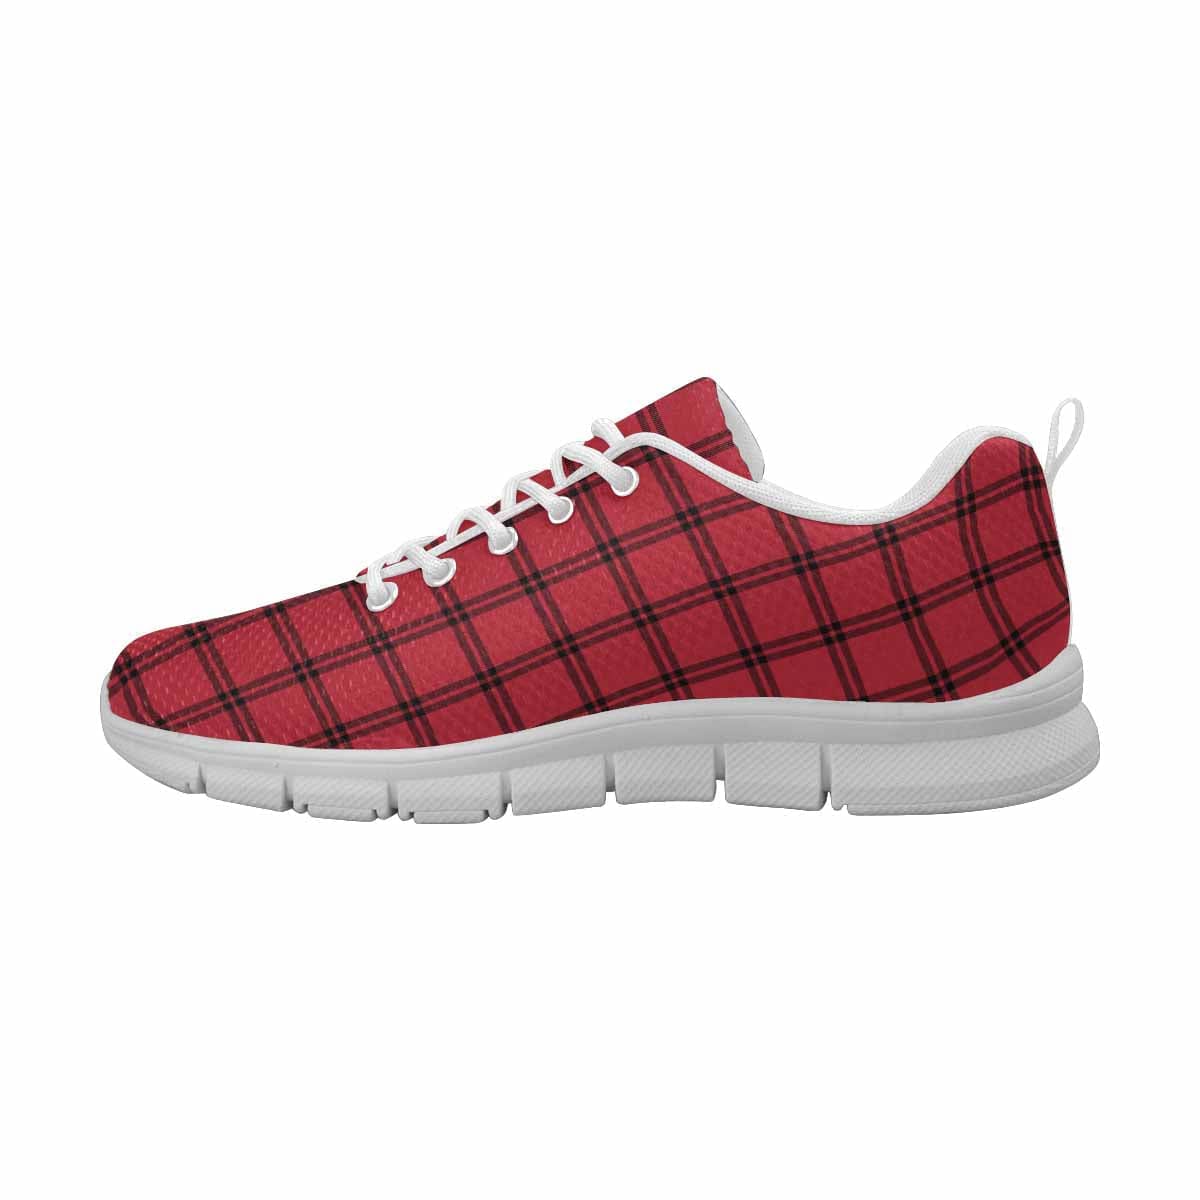 Sneakers for Men,   Buffalo Plaid Red and White - Running Shoes DG837 - Scarvesnthangs